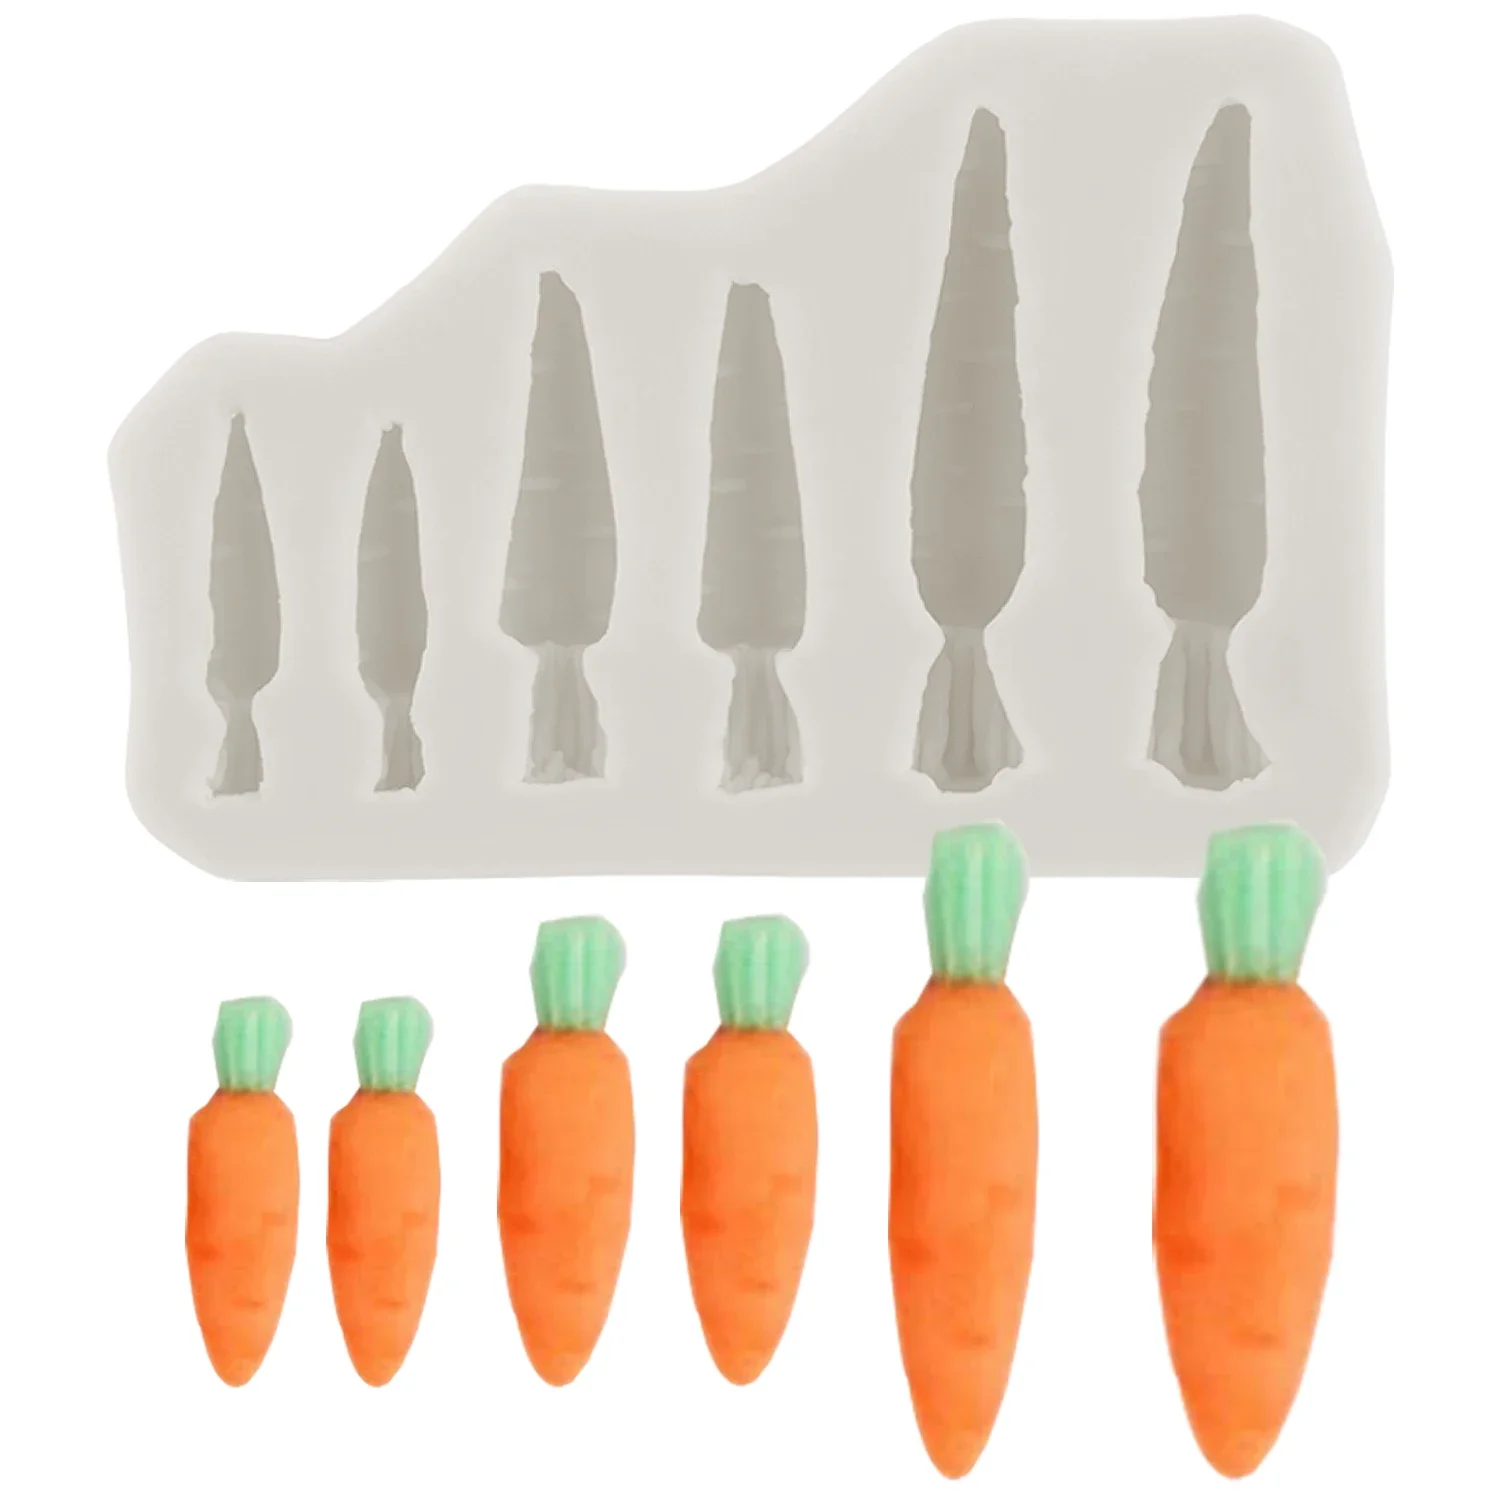 

Easter Carrot Silicone Mold Cupcake Topper Fondant Molds Cake Decorating Tools Candy Chocolate Gumpaste Moulds